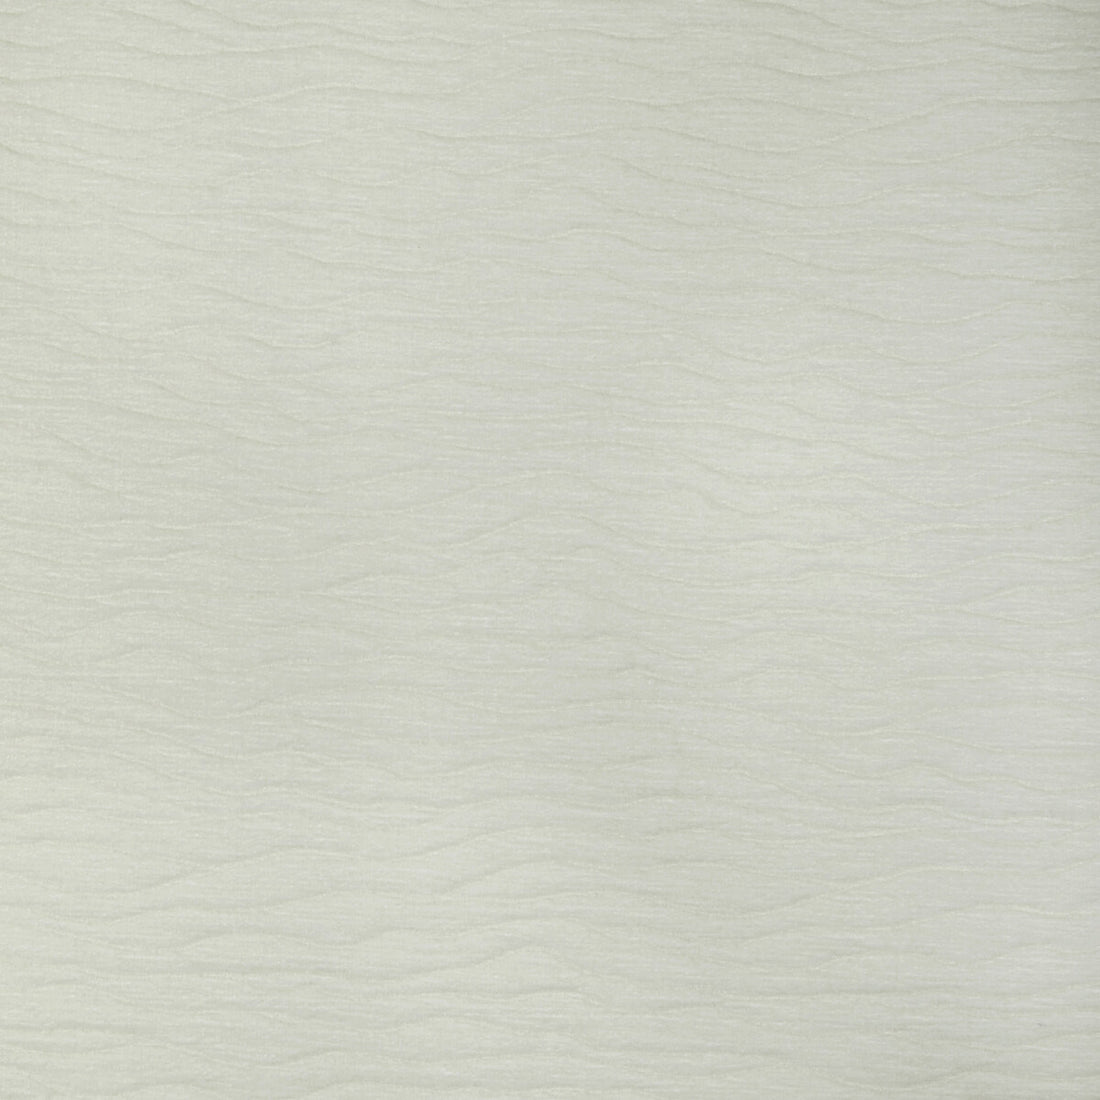 Rippling Wave fabric in pearl color - pattern 36824.1.0 - by Kravet Design in the Candice Olson collection